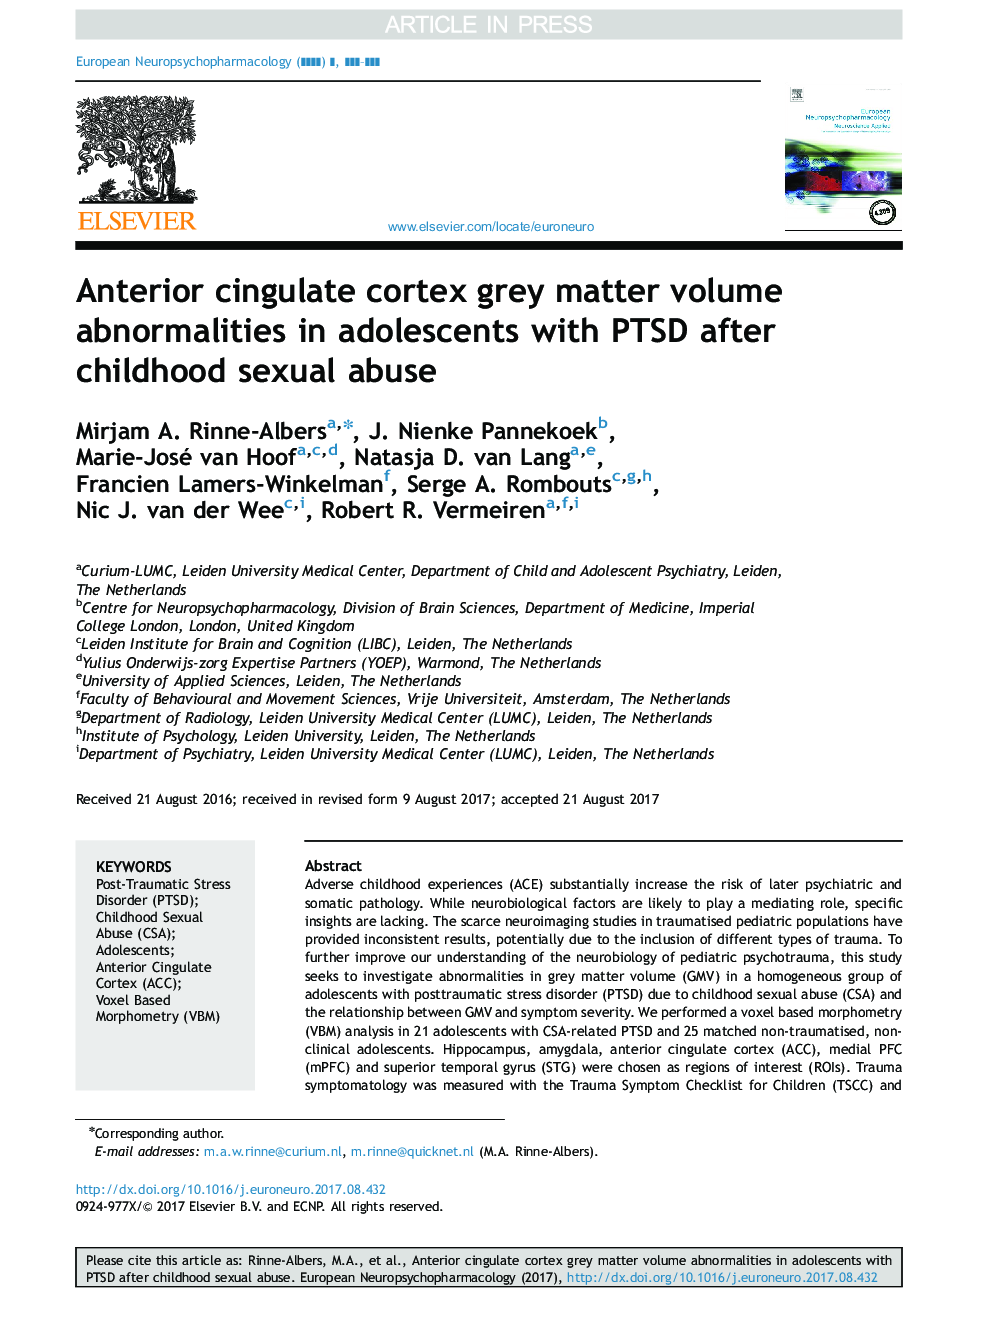 Anterior cingulate cortex grey matter volume abnormalities in adolescents with PTSD after childhood sexual abuse